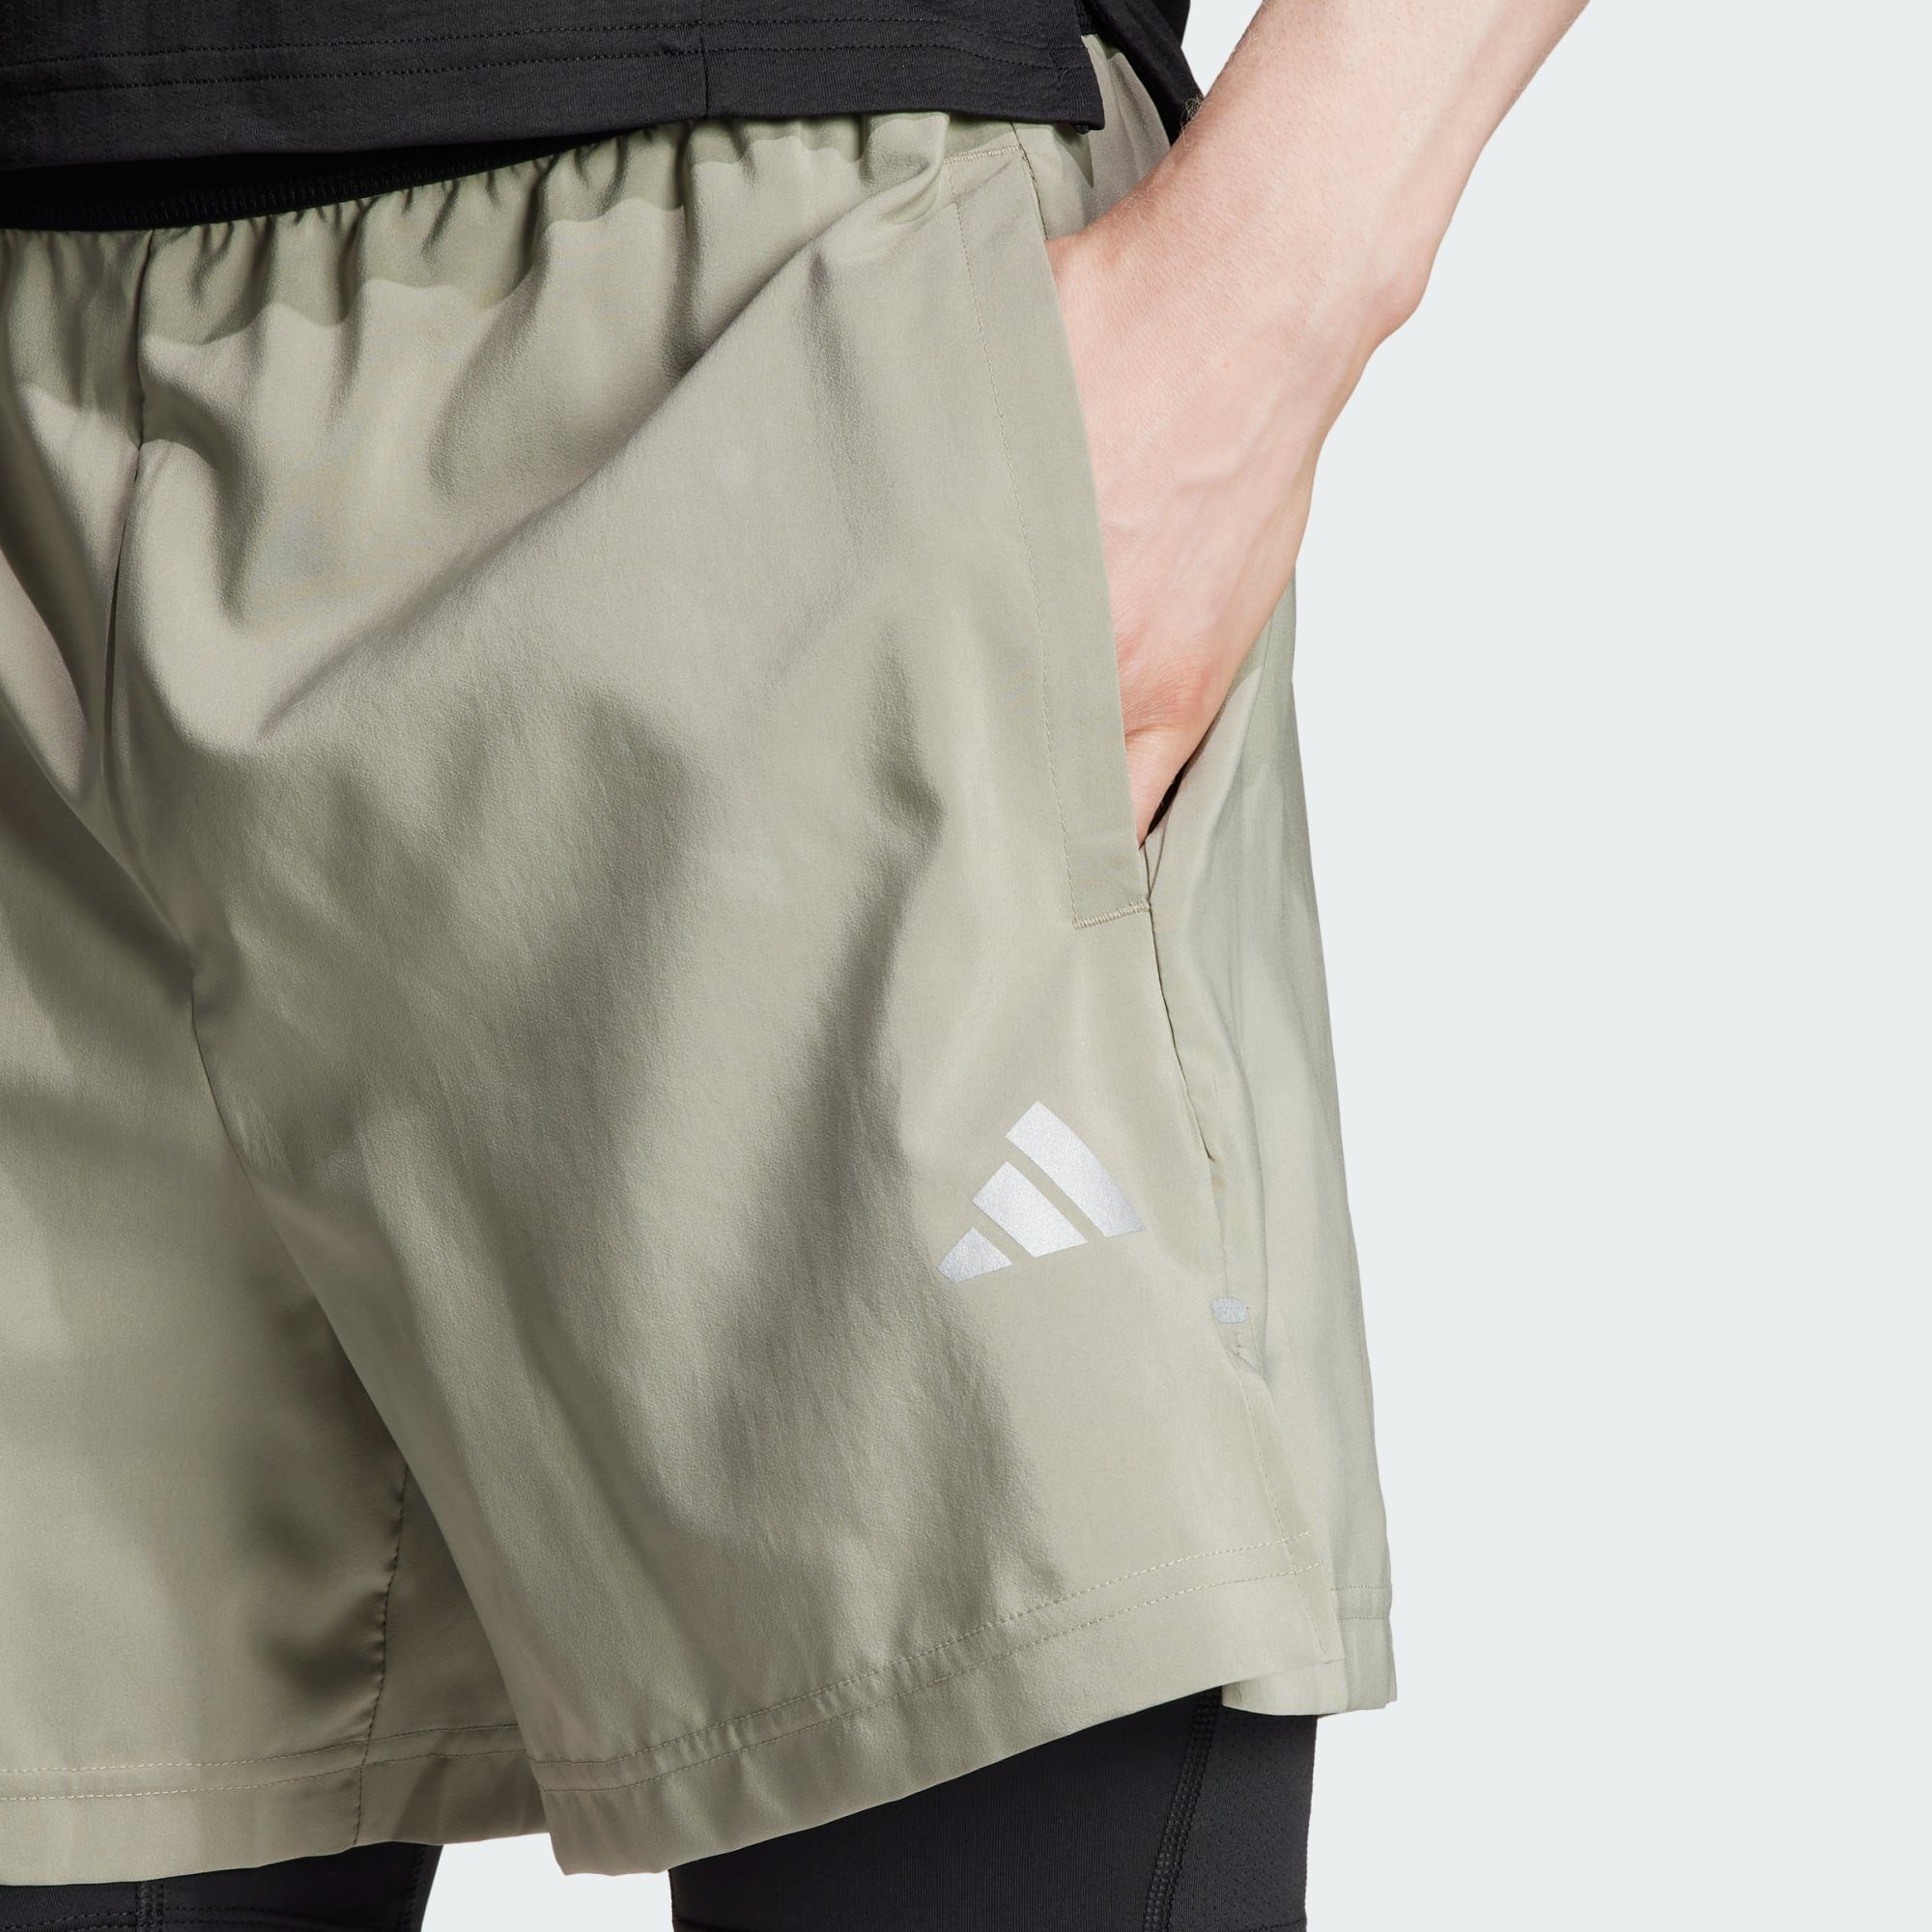 Pebble TRAINING Silver 2-in-1-Shorts GYM+ adidas Performance 2-IN-1 SHORTS